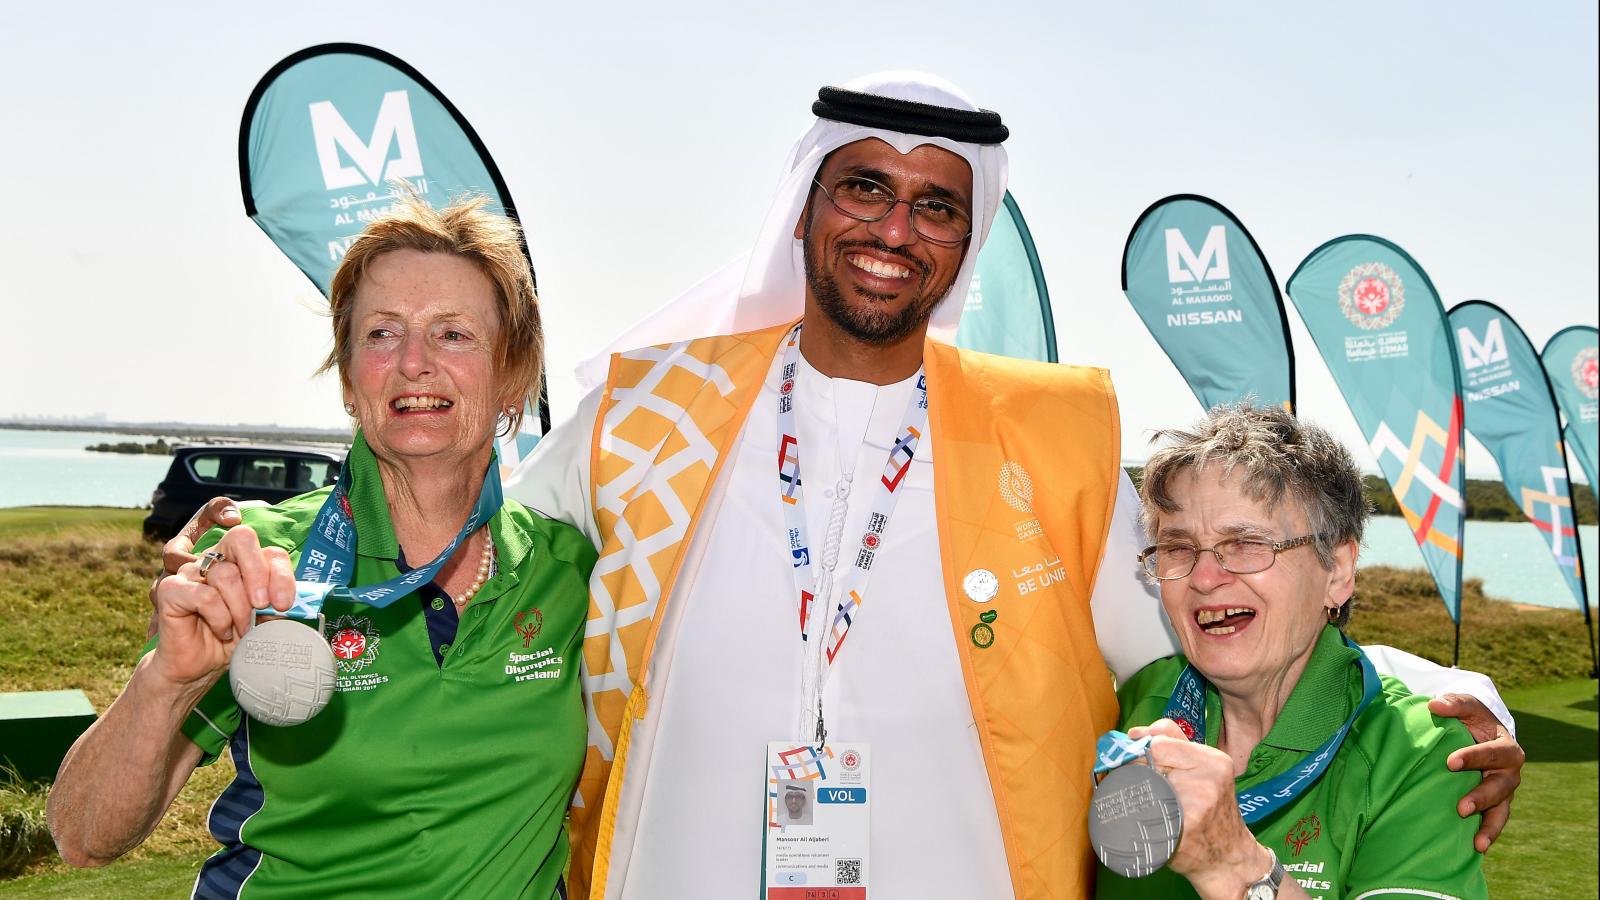 Athlete Mairead Moroney with her playing partner Jill Moloney winning a silver medal at the 2019 World Summer Games in Abu Dhabi